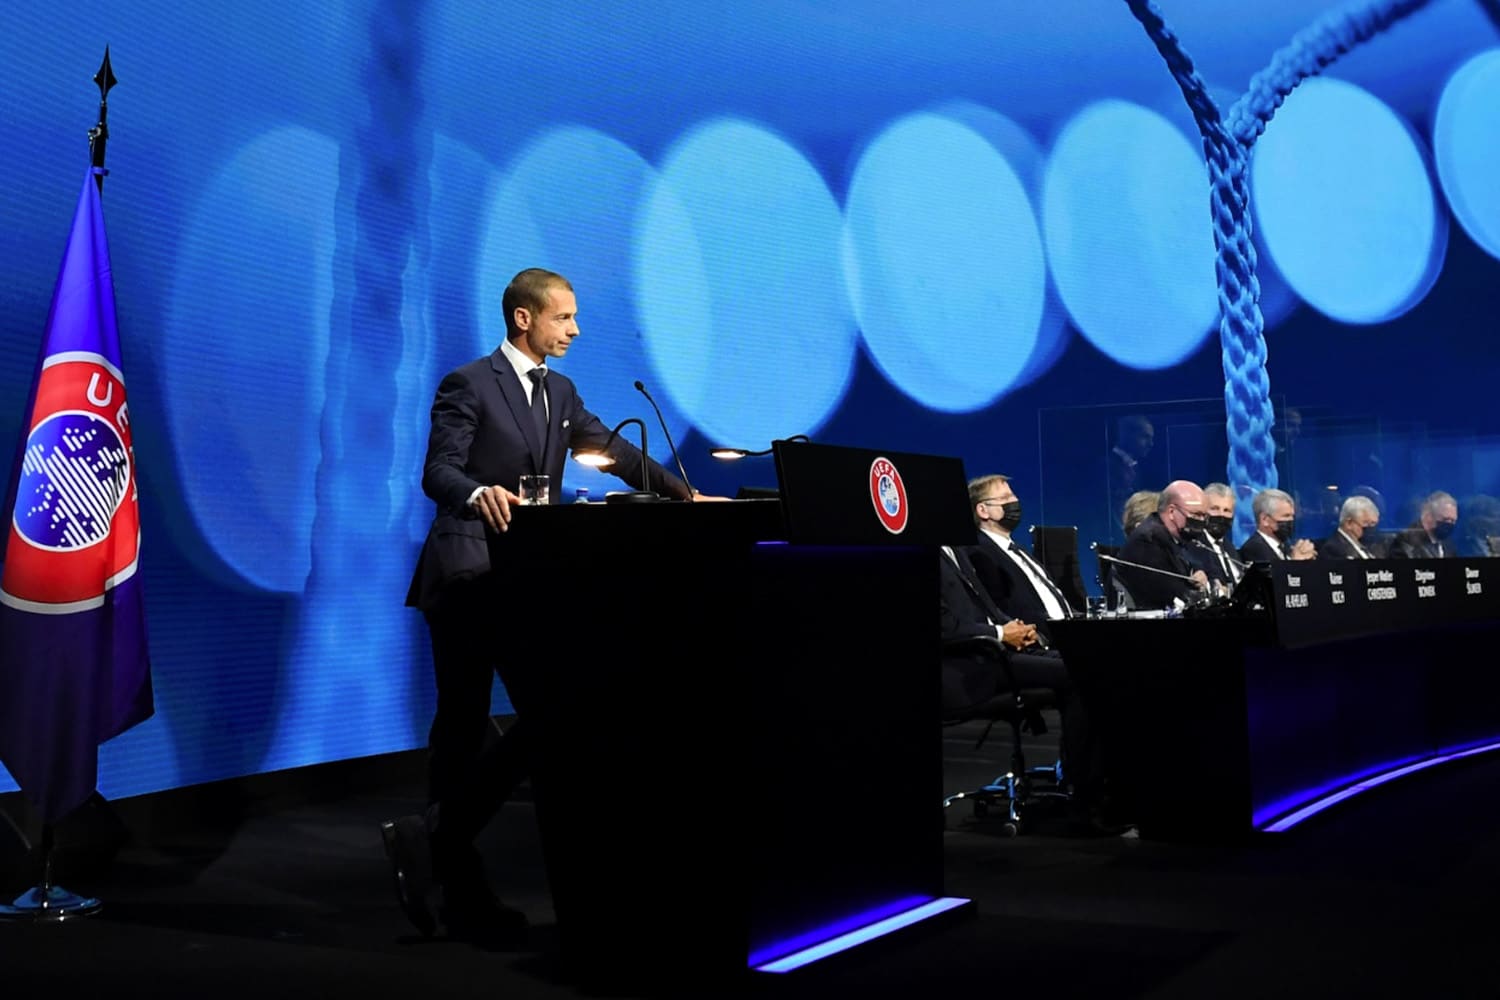 UEFA president during an address to stakeholders